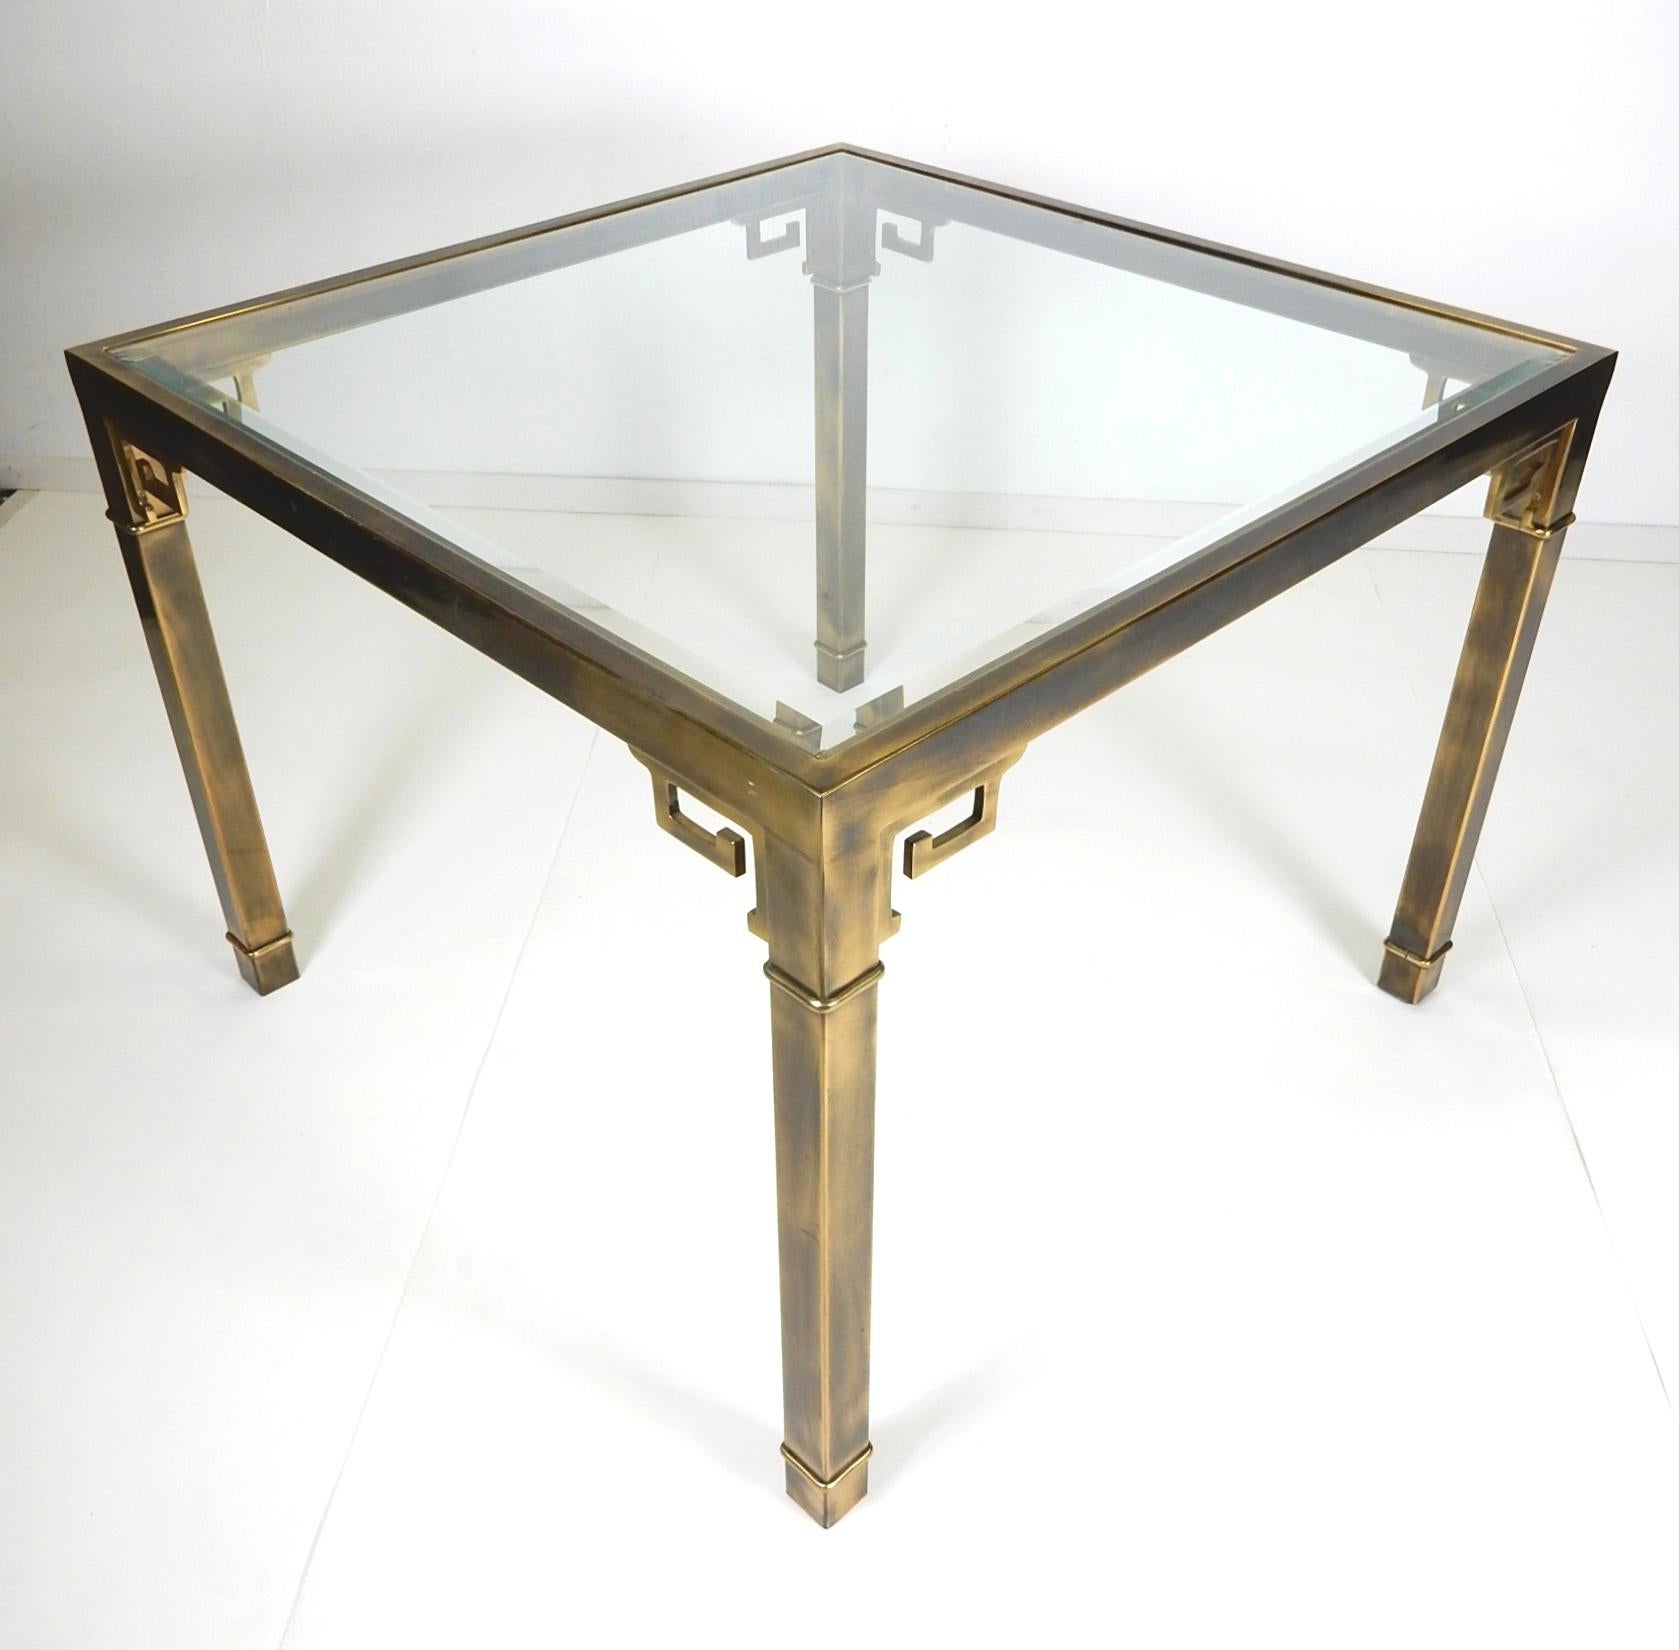 Rare square game table by Mastercraft Furniture, circa 1970s.
Brushed patina'd brass finish with Greek key design.
Inset glass top. Measures: 38 inch square, 29 inch tall.
  